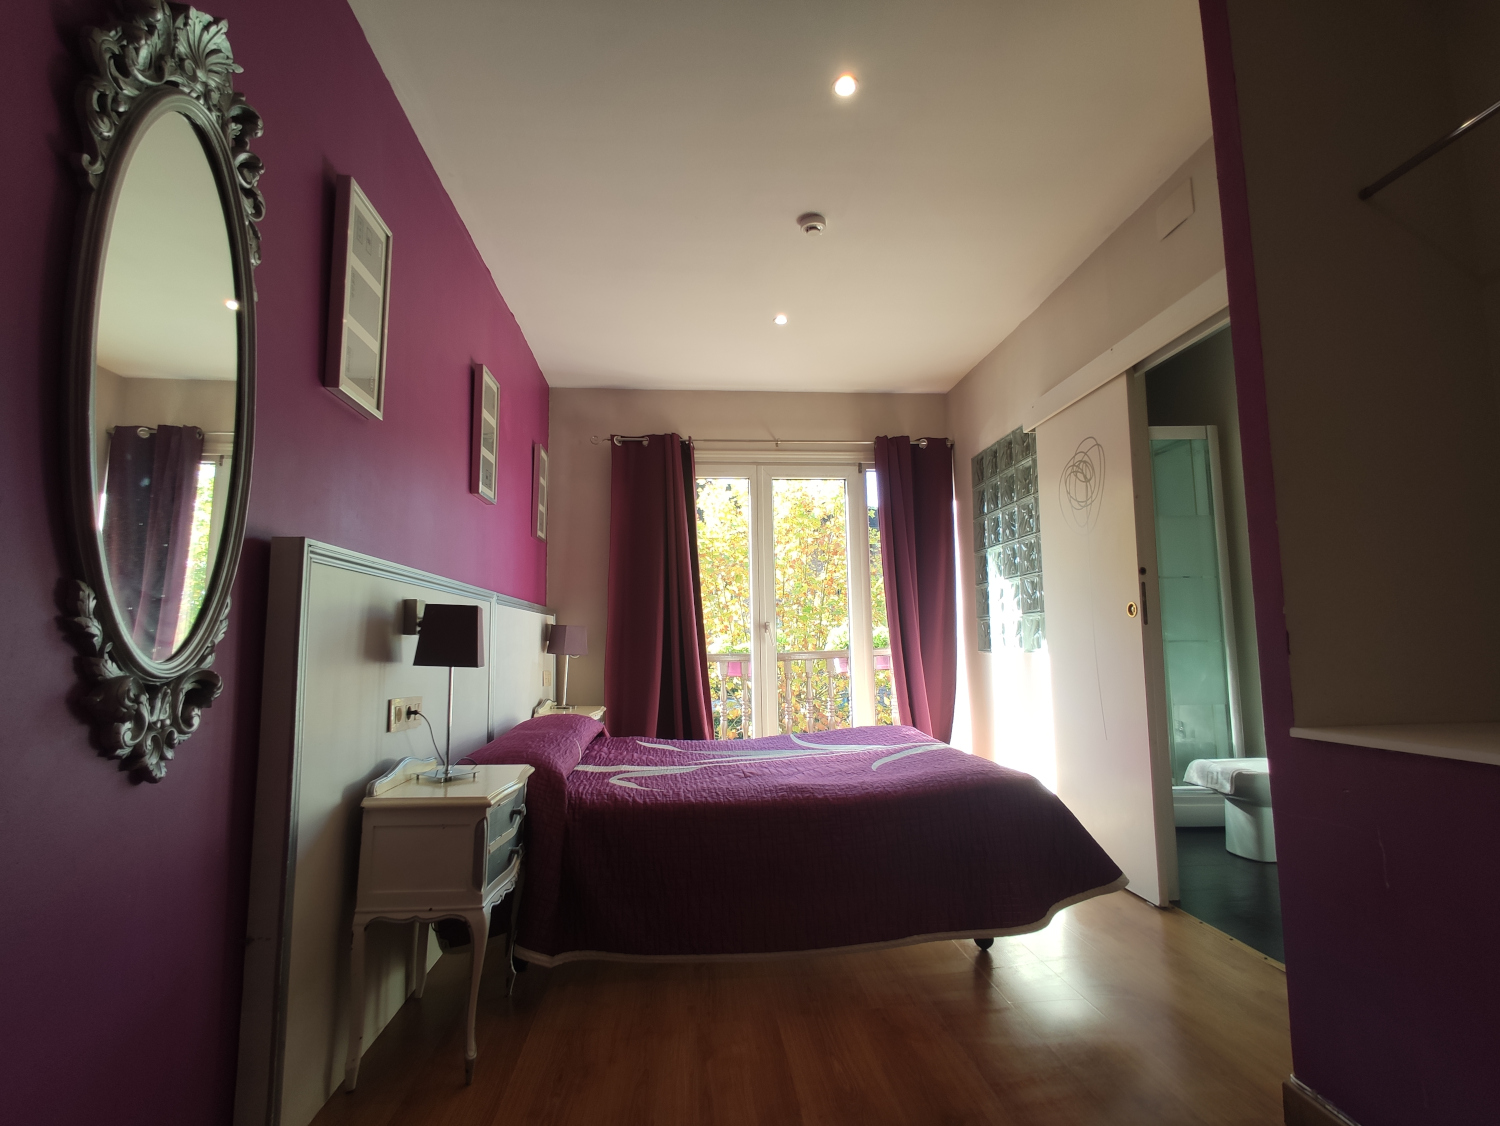 Double room (double bed) 